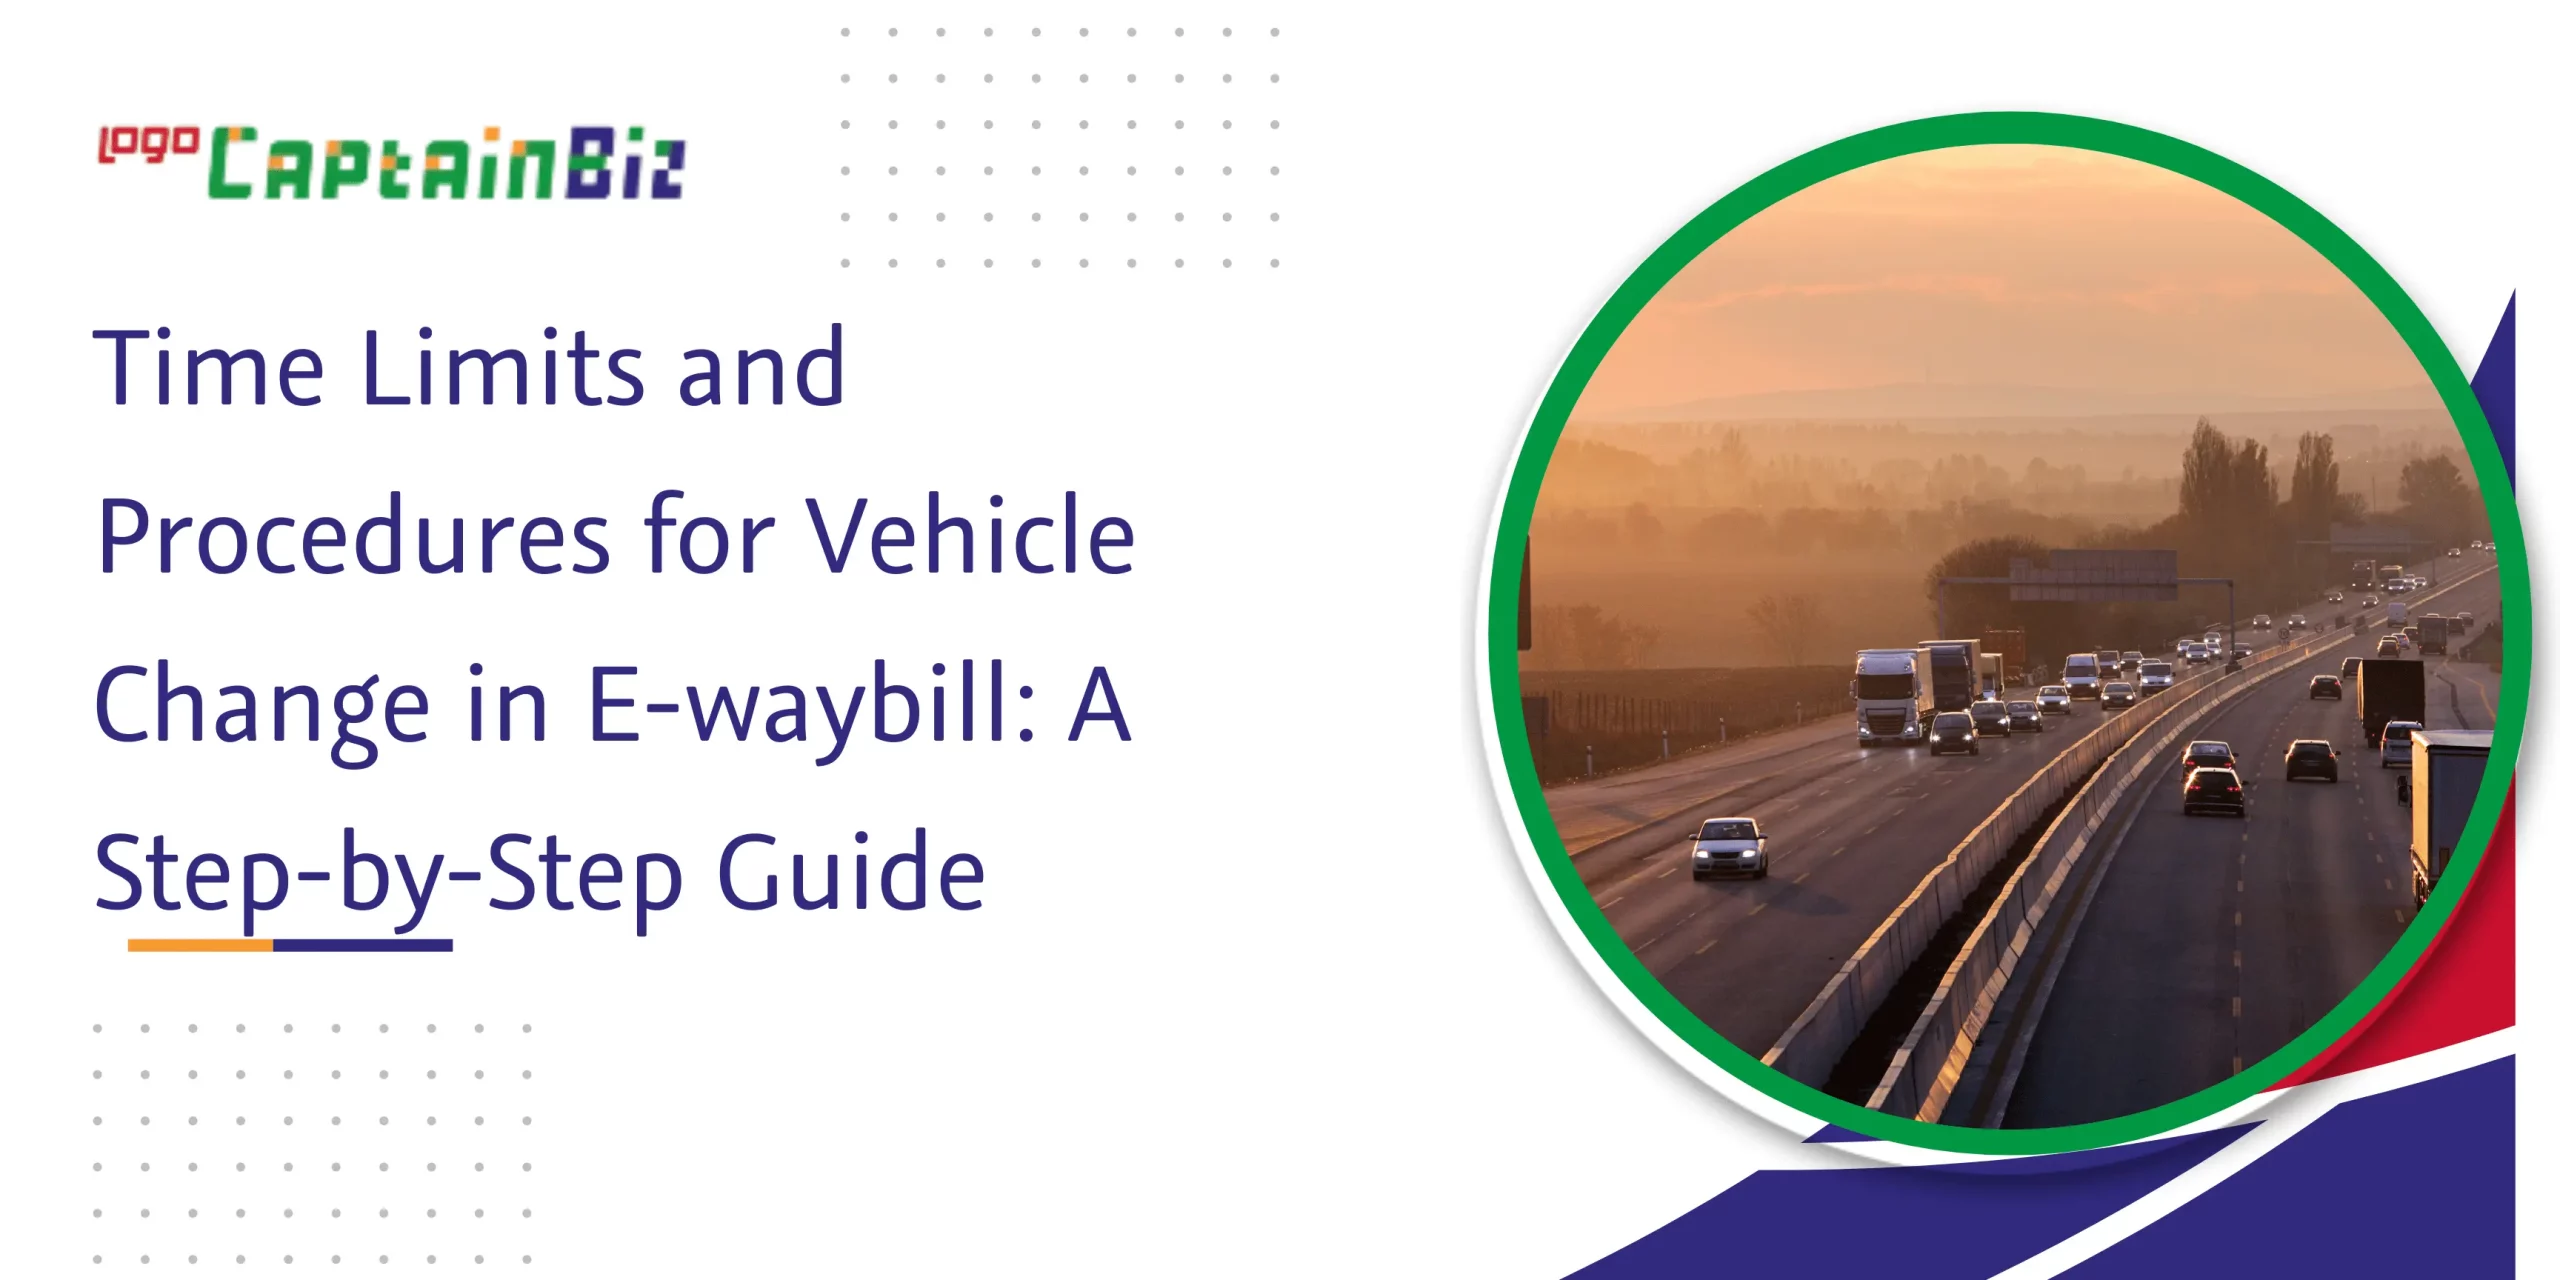 CaptainBiz: time limits and procedures for vehicle change in e-waybill: a step-by-step guide